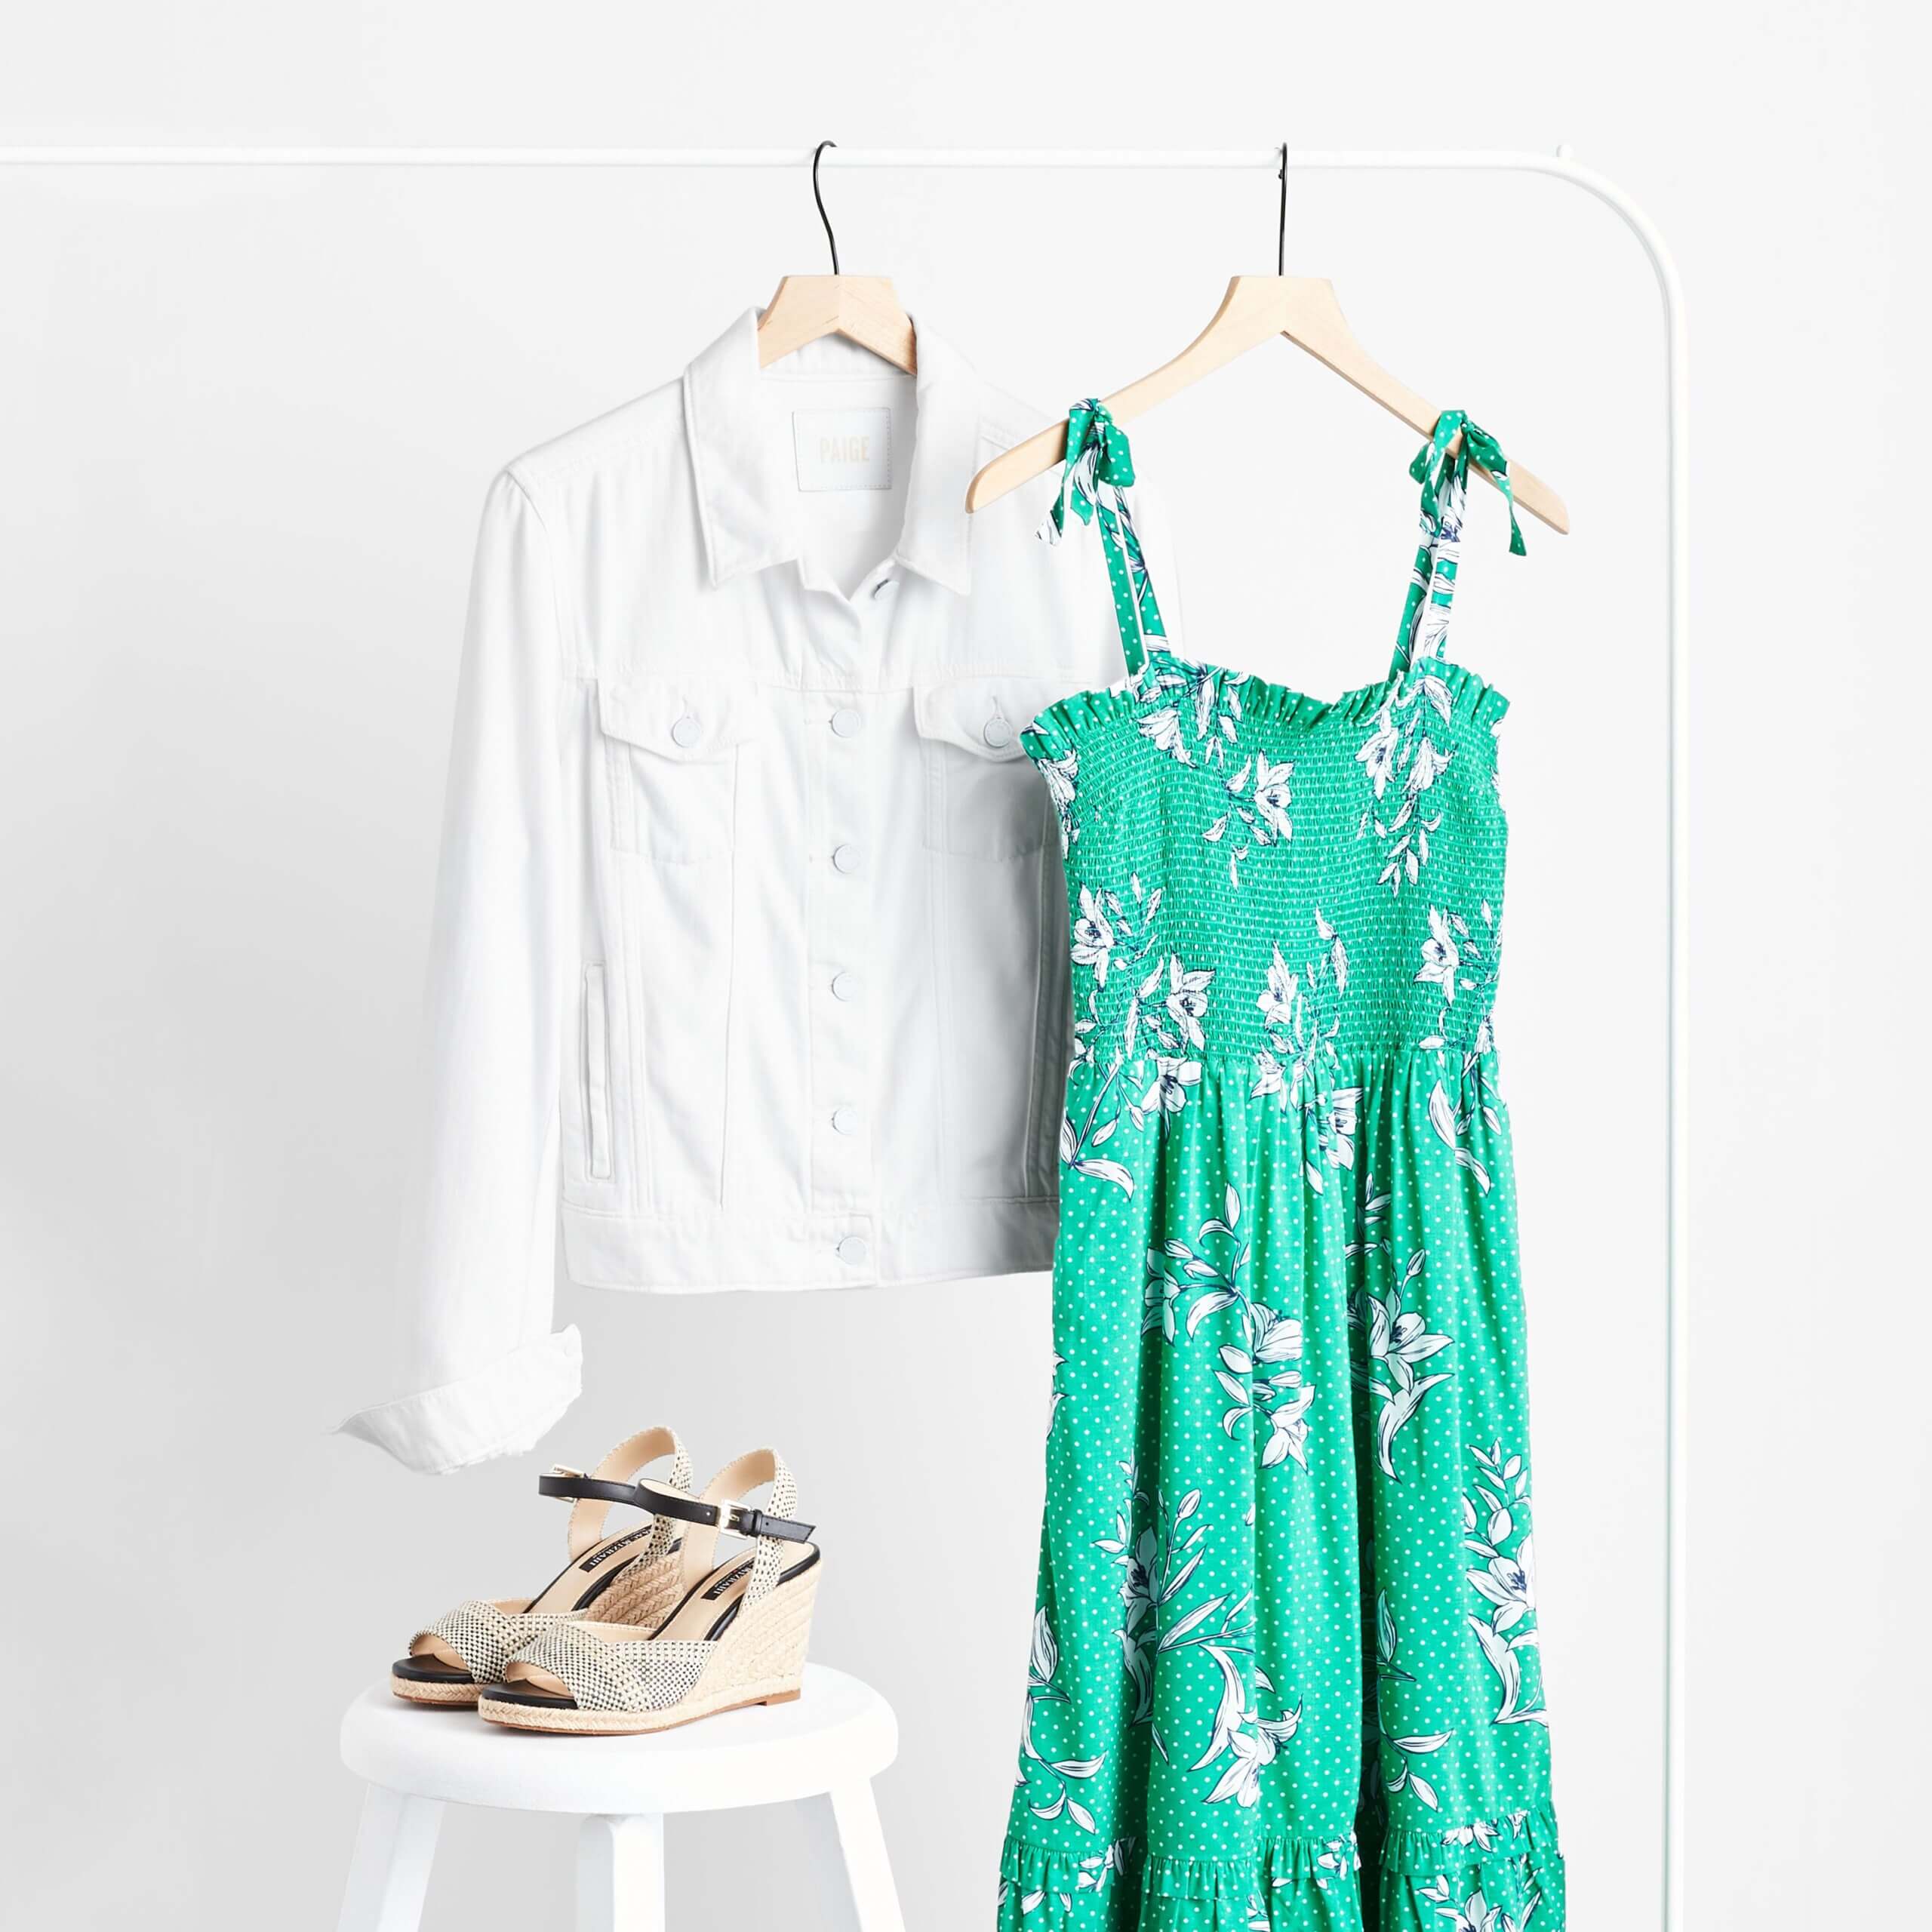 Women's Summer Cocktail Attire, Personal Styling